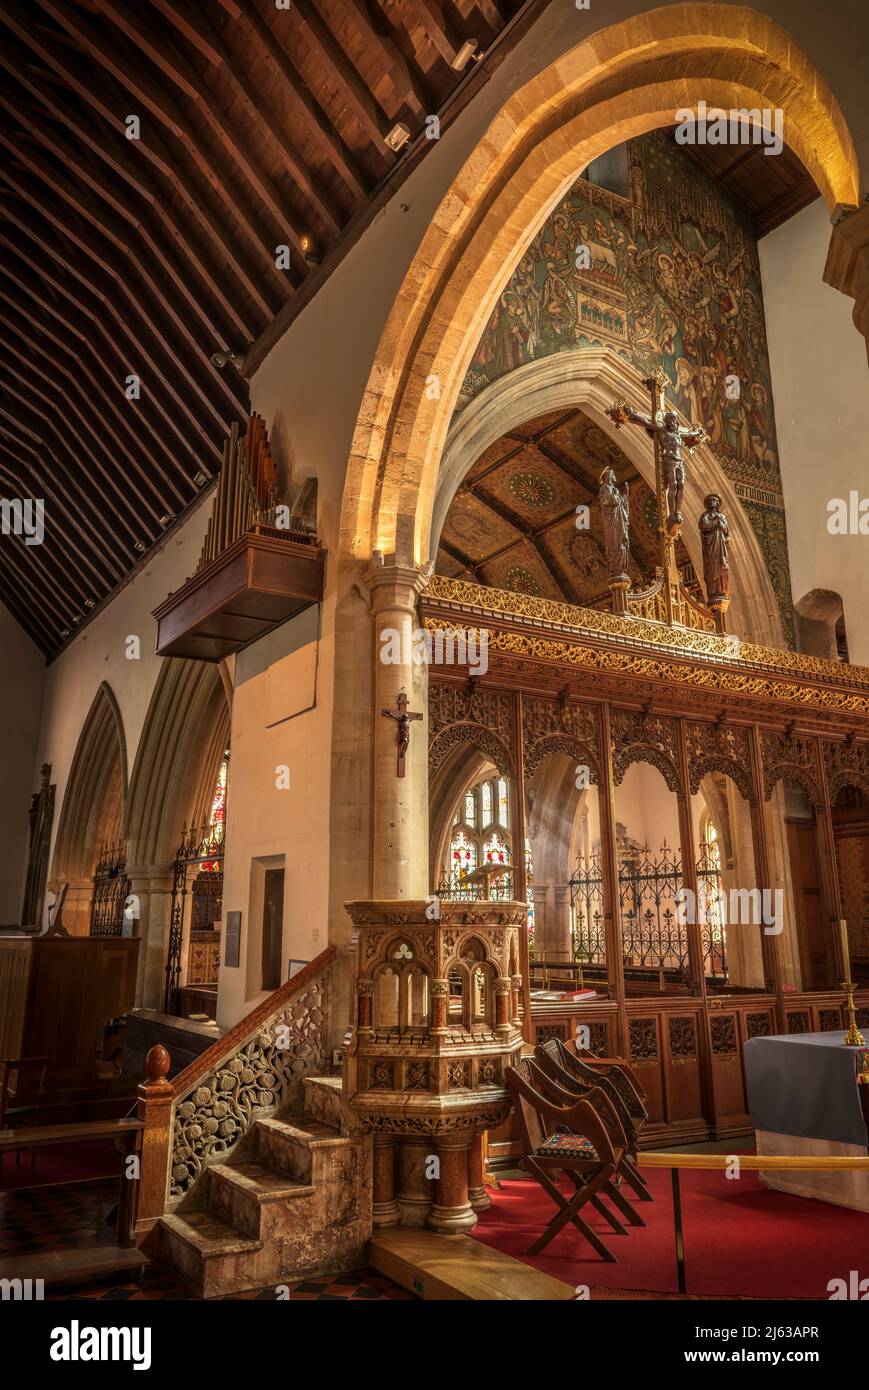 The interior of the Parish Church of St Mary the Virgin in Henley-on-Thames, Oxfordshire, England. Stock Photo